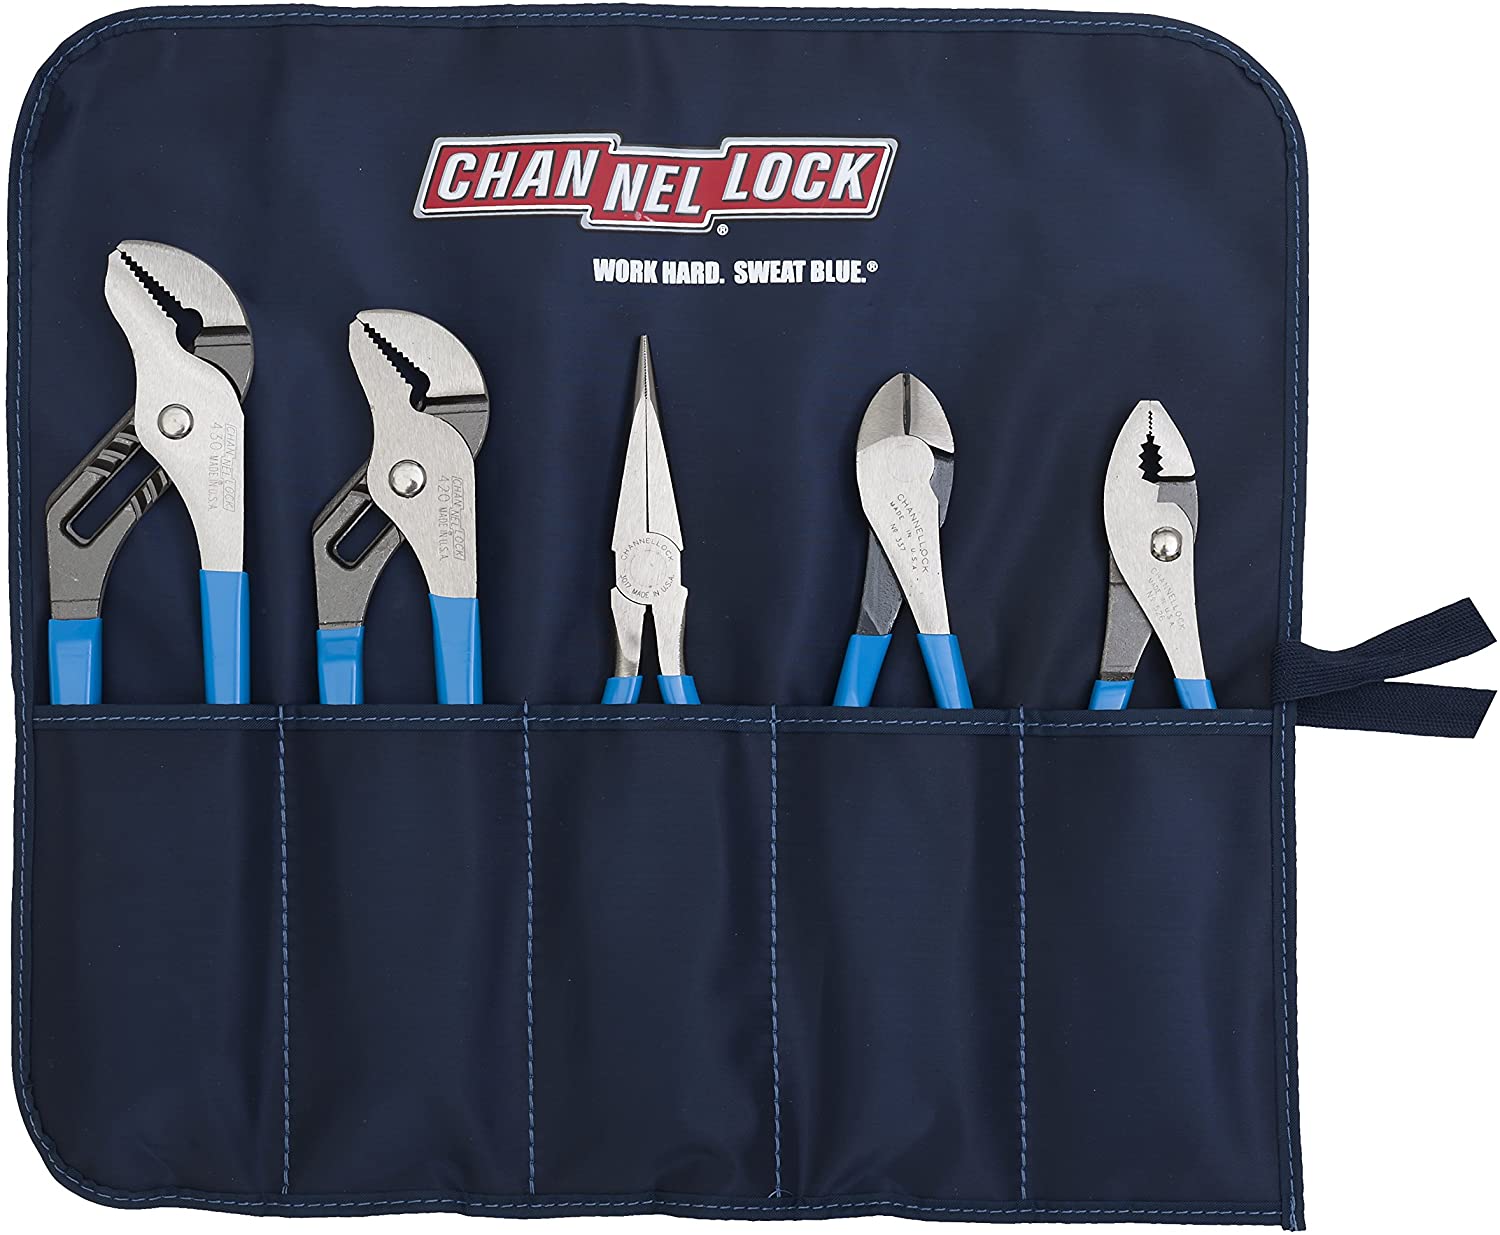 Channellock TOOL ROLL-3  5-Piece Plier Set in Handy Tool Roll - MPR Tools & Equipment